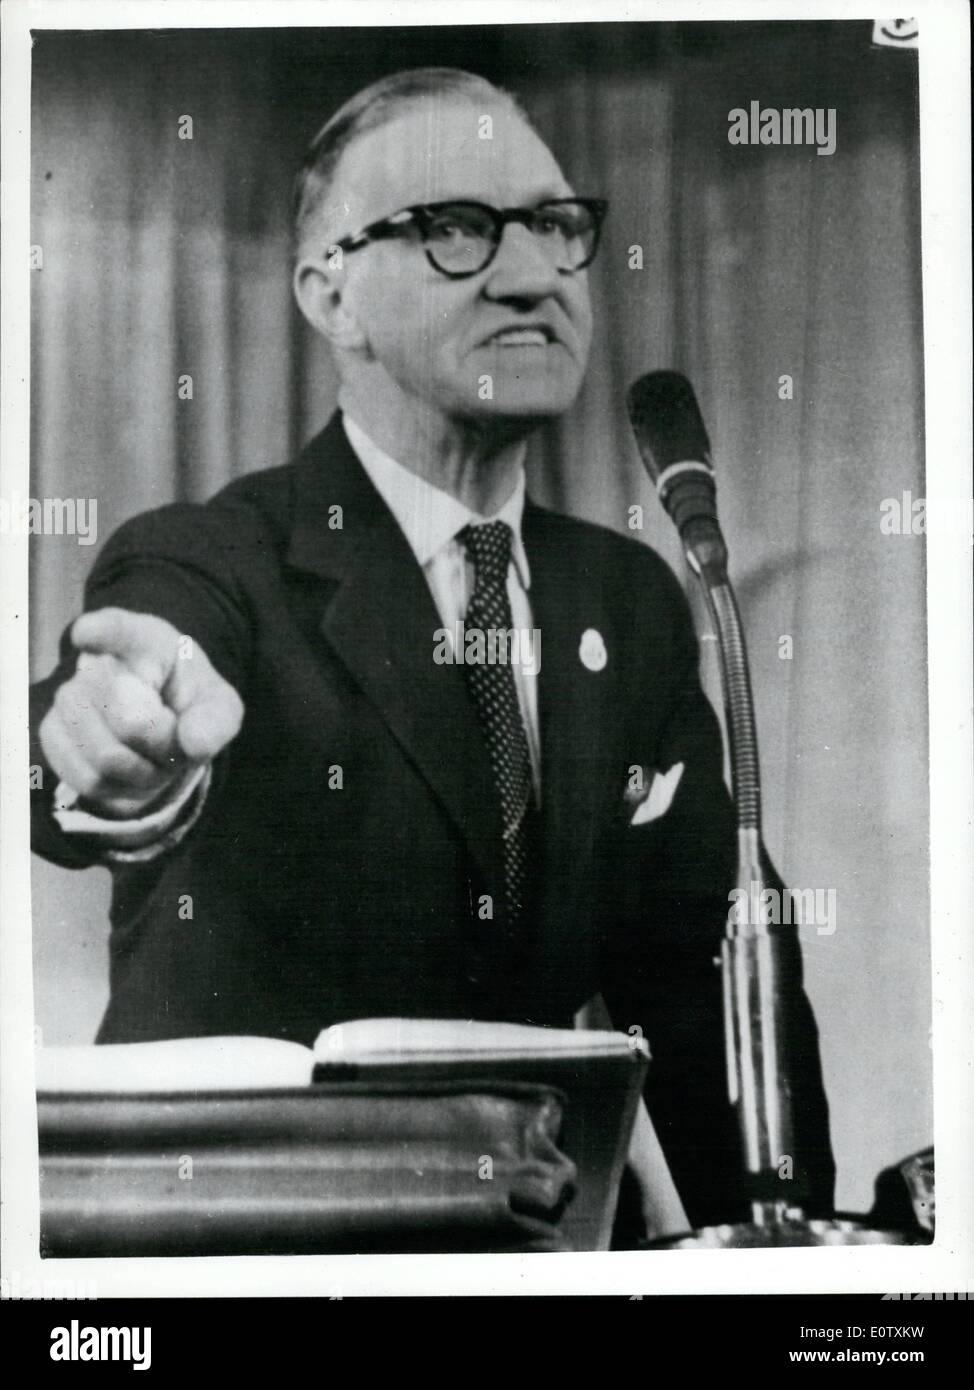 Sep. 08, 1960 - 8.9.60 Trades Union Congress in Douglas, I.O.M. Mr. Frank Cousins, the Transport Workers' leader, won his battle at the Trades Union Congress in Douglas, Isle of Man yesterday. The T.U.C. is now committed to a policy of renouncing nuclear weapons. But Congress also approved official Labour Defence policy, which insists on Britain remaining in an NATO equipped with nuclear weapons, though leaving nuclear production exclusively to the Americans. Photo Shows: Sir Tom Williamson, General Secretary of the N.U.G.M.W., speaking at Douglas, Isle of Man yesterday. Stock Photo